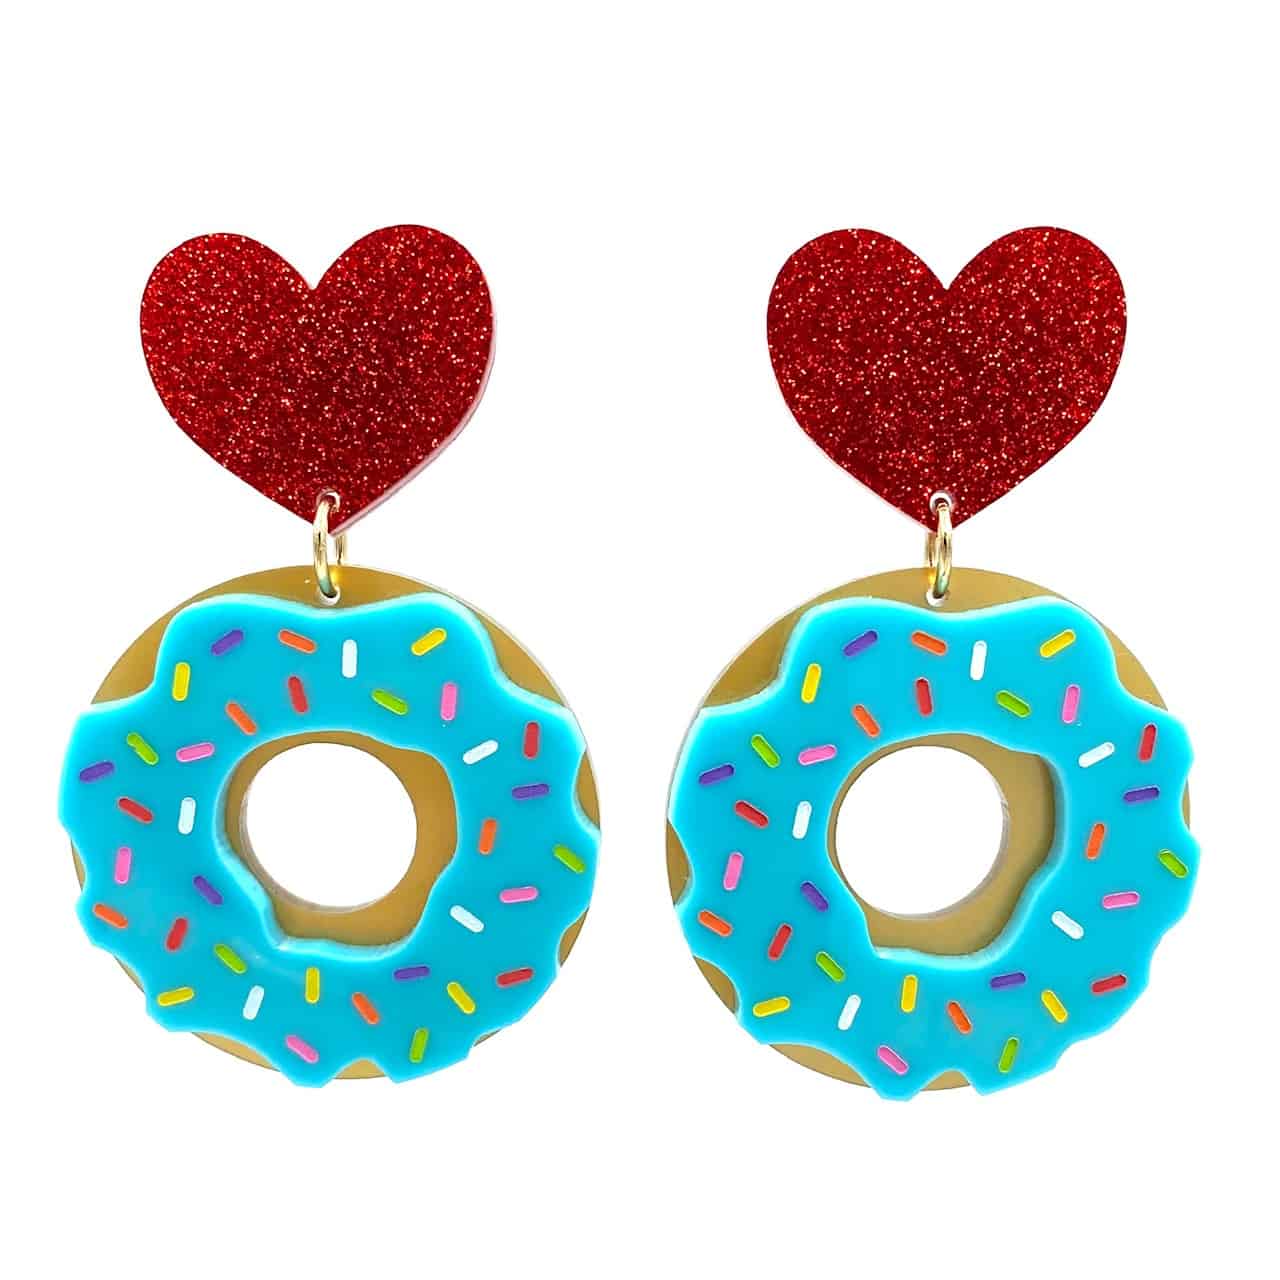 Haus of Dizzy 'Nuts about Donuts' Earrings